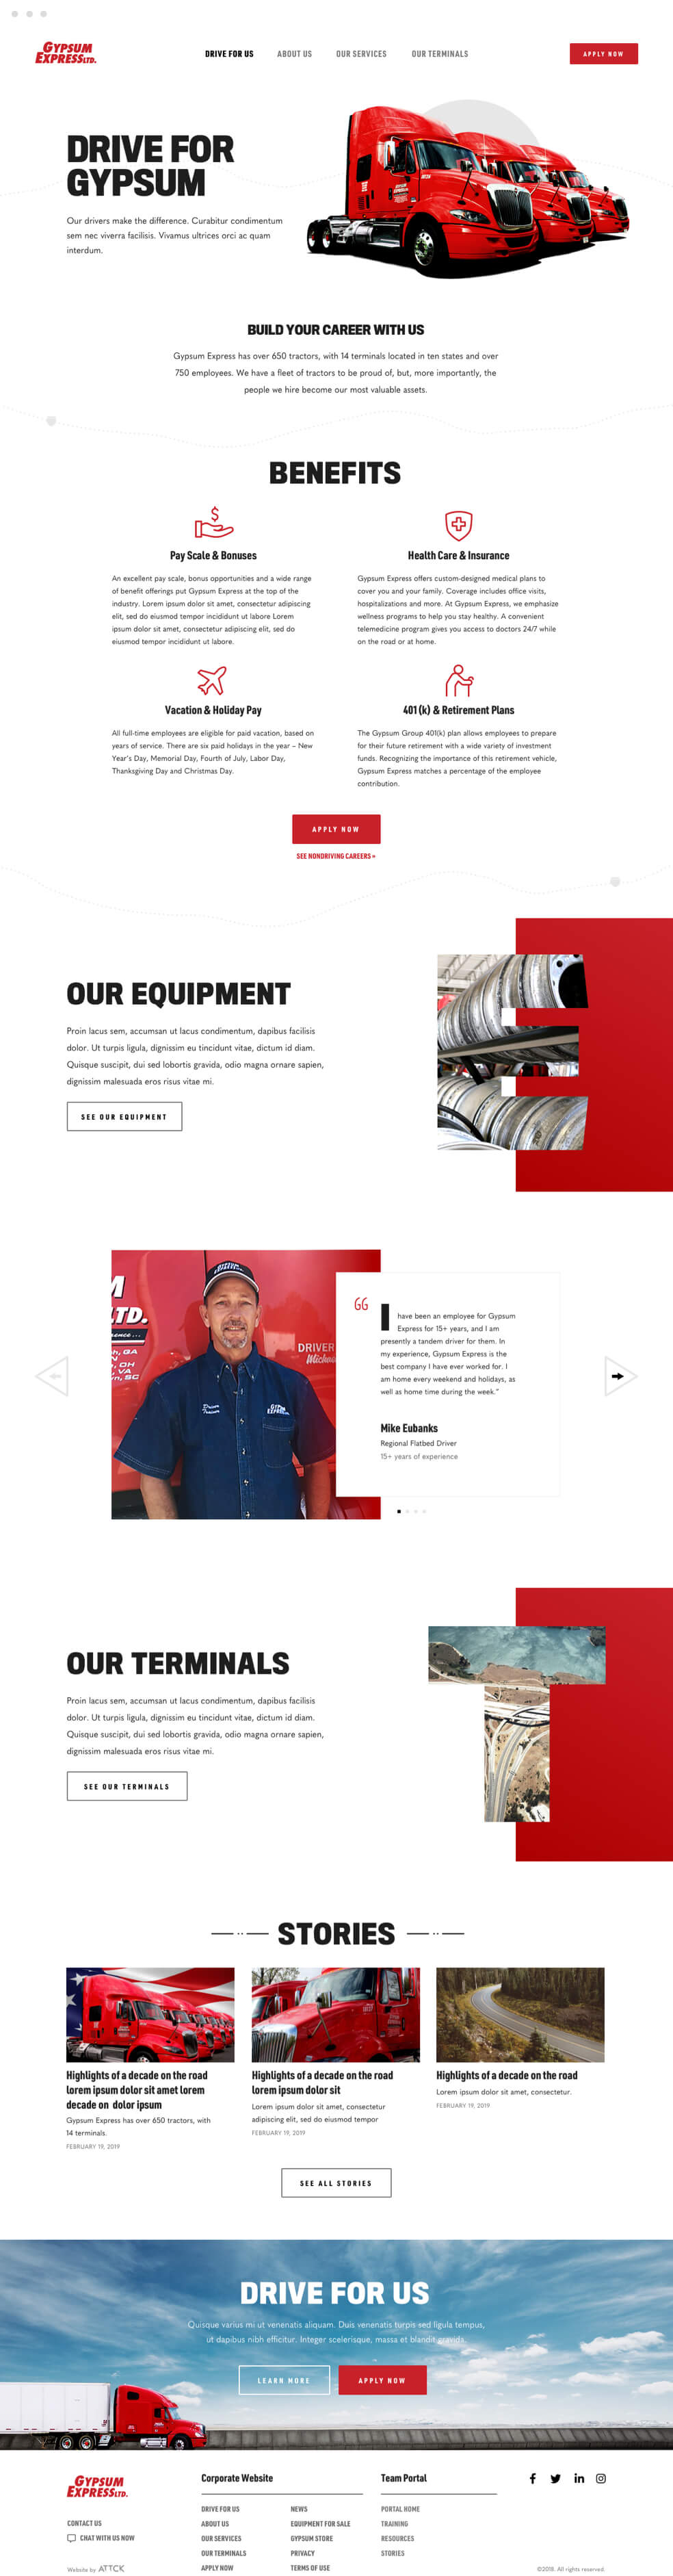 Drive for Gypsum page. ATTCK case study